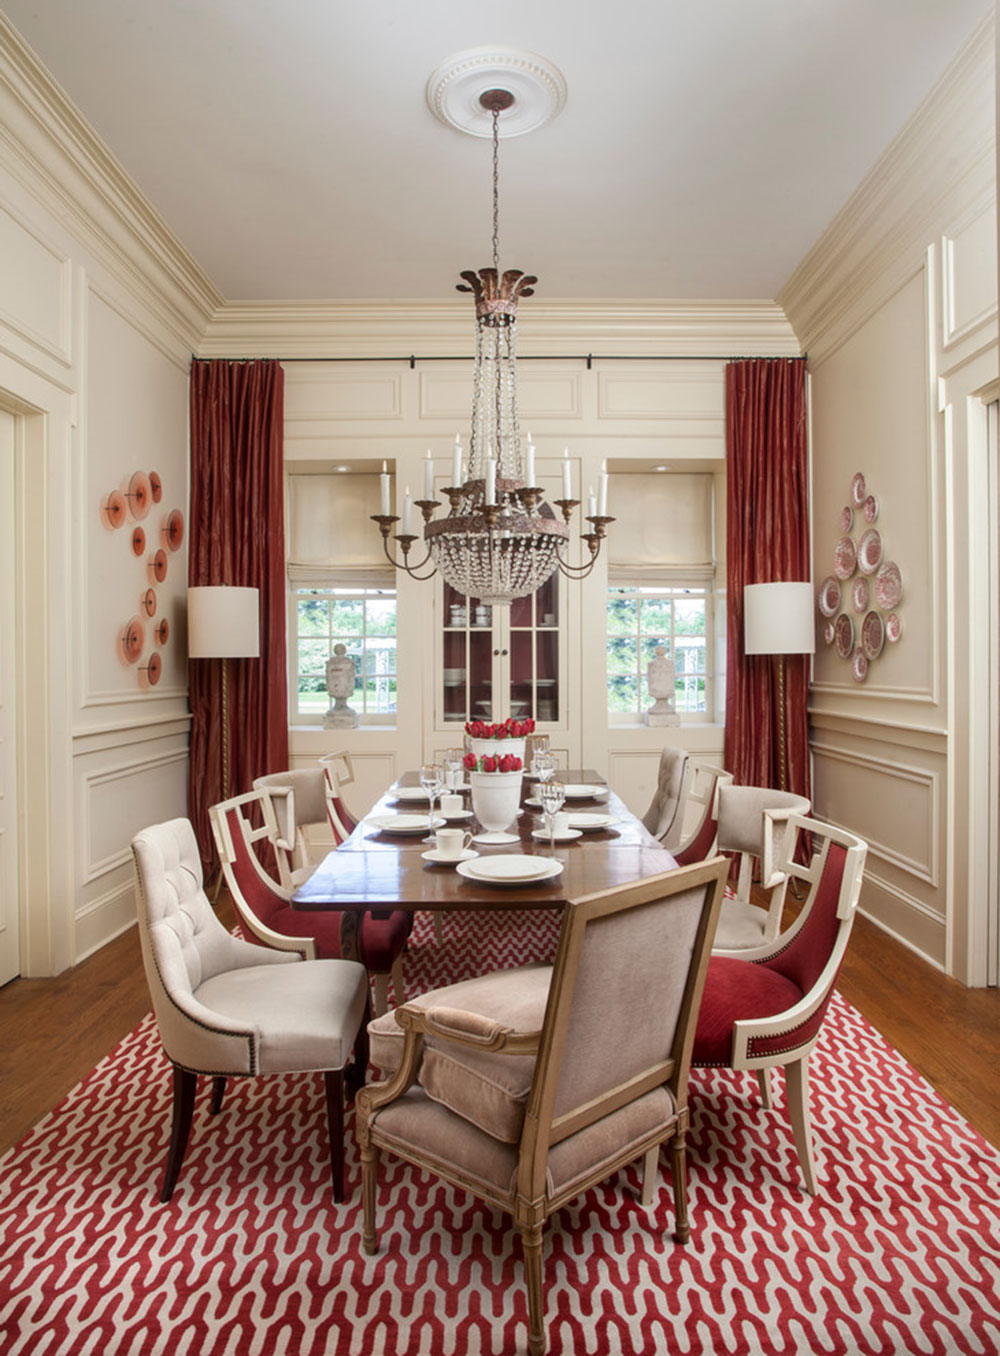 How to choose a chandelier for the dining room12 How to choose a chandelier for the dining room